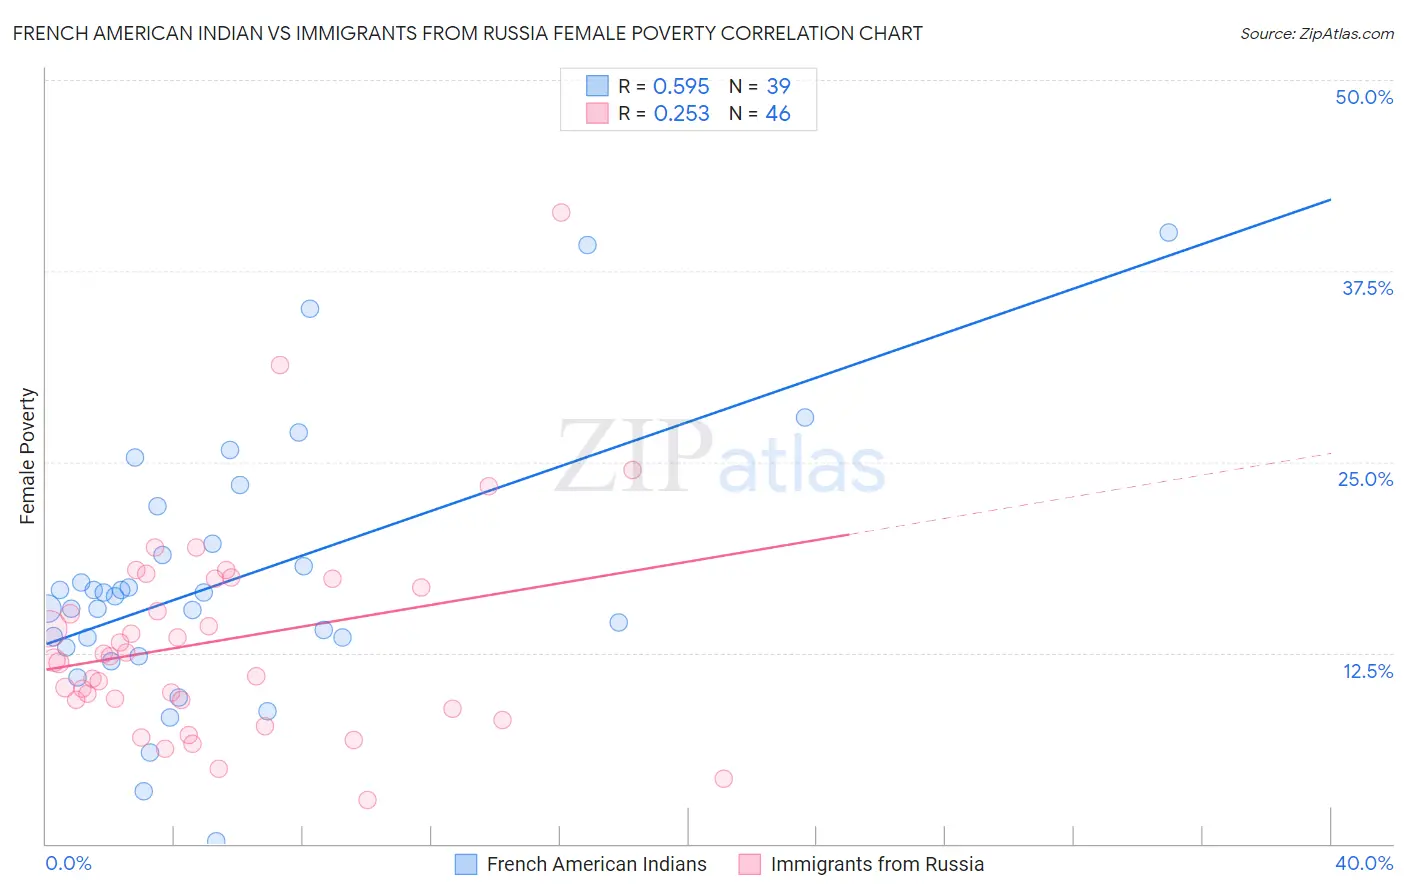 French American Indian vs Immigrants from Russia Female Poverty